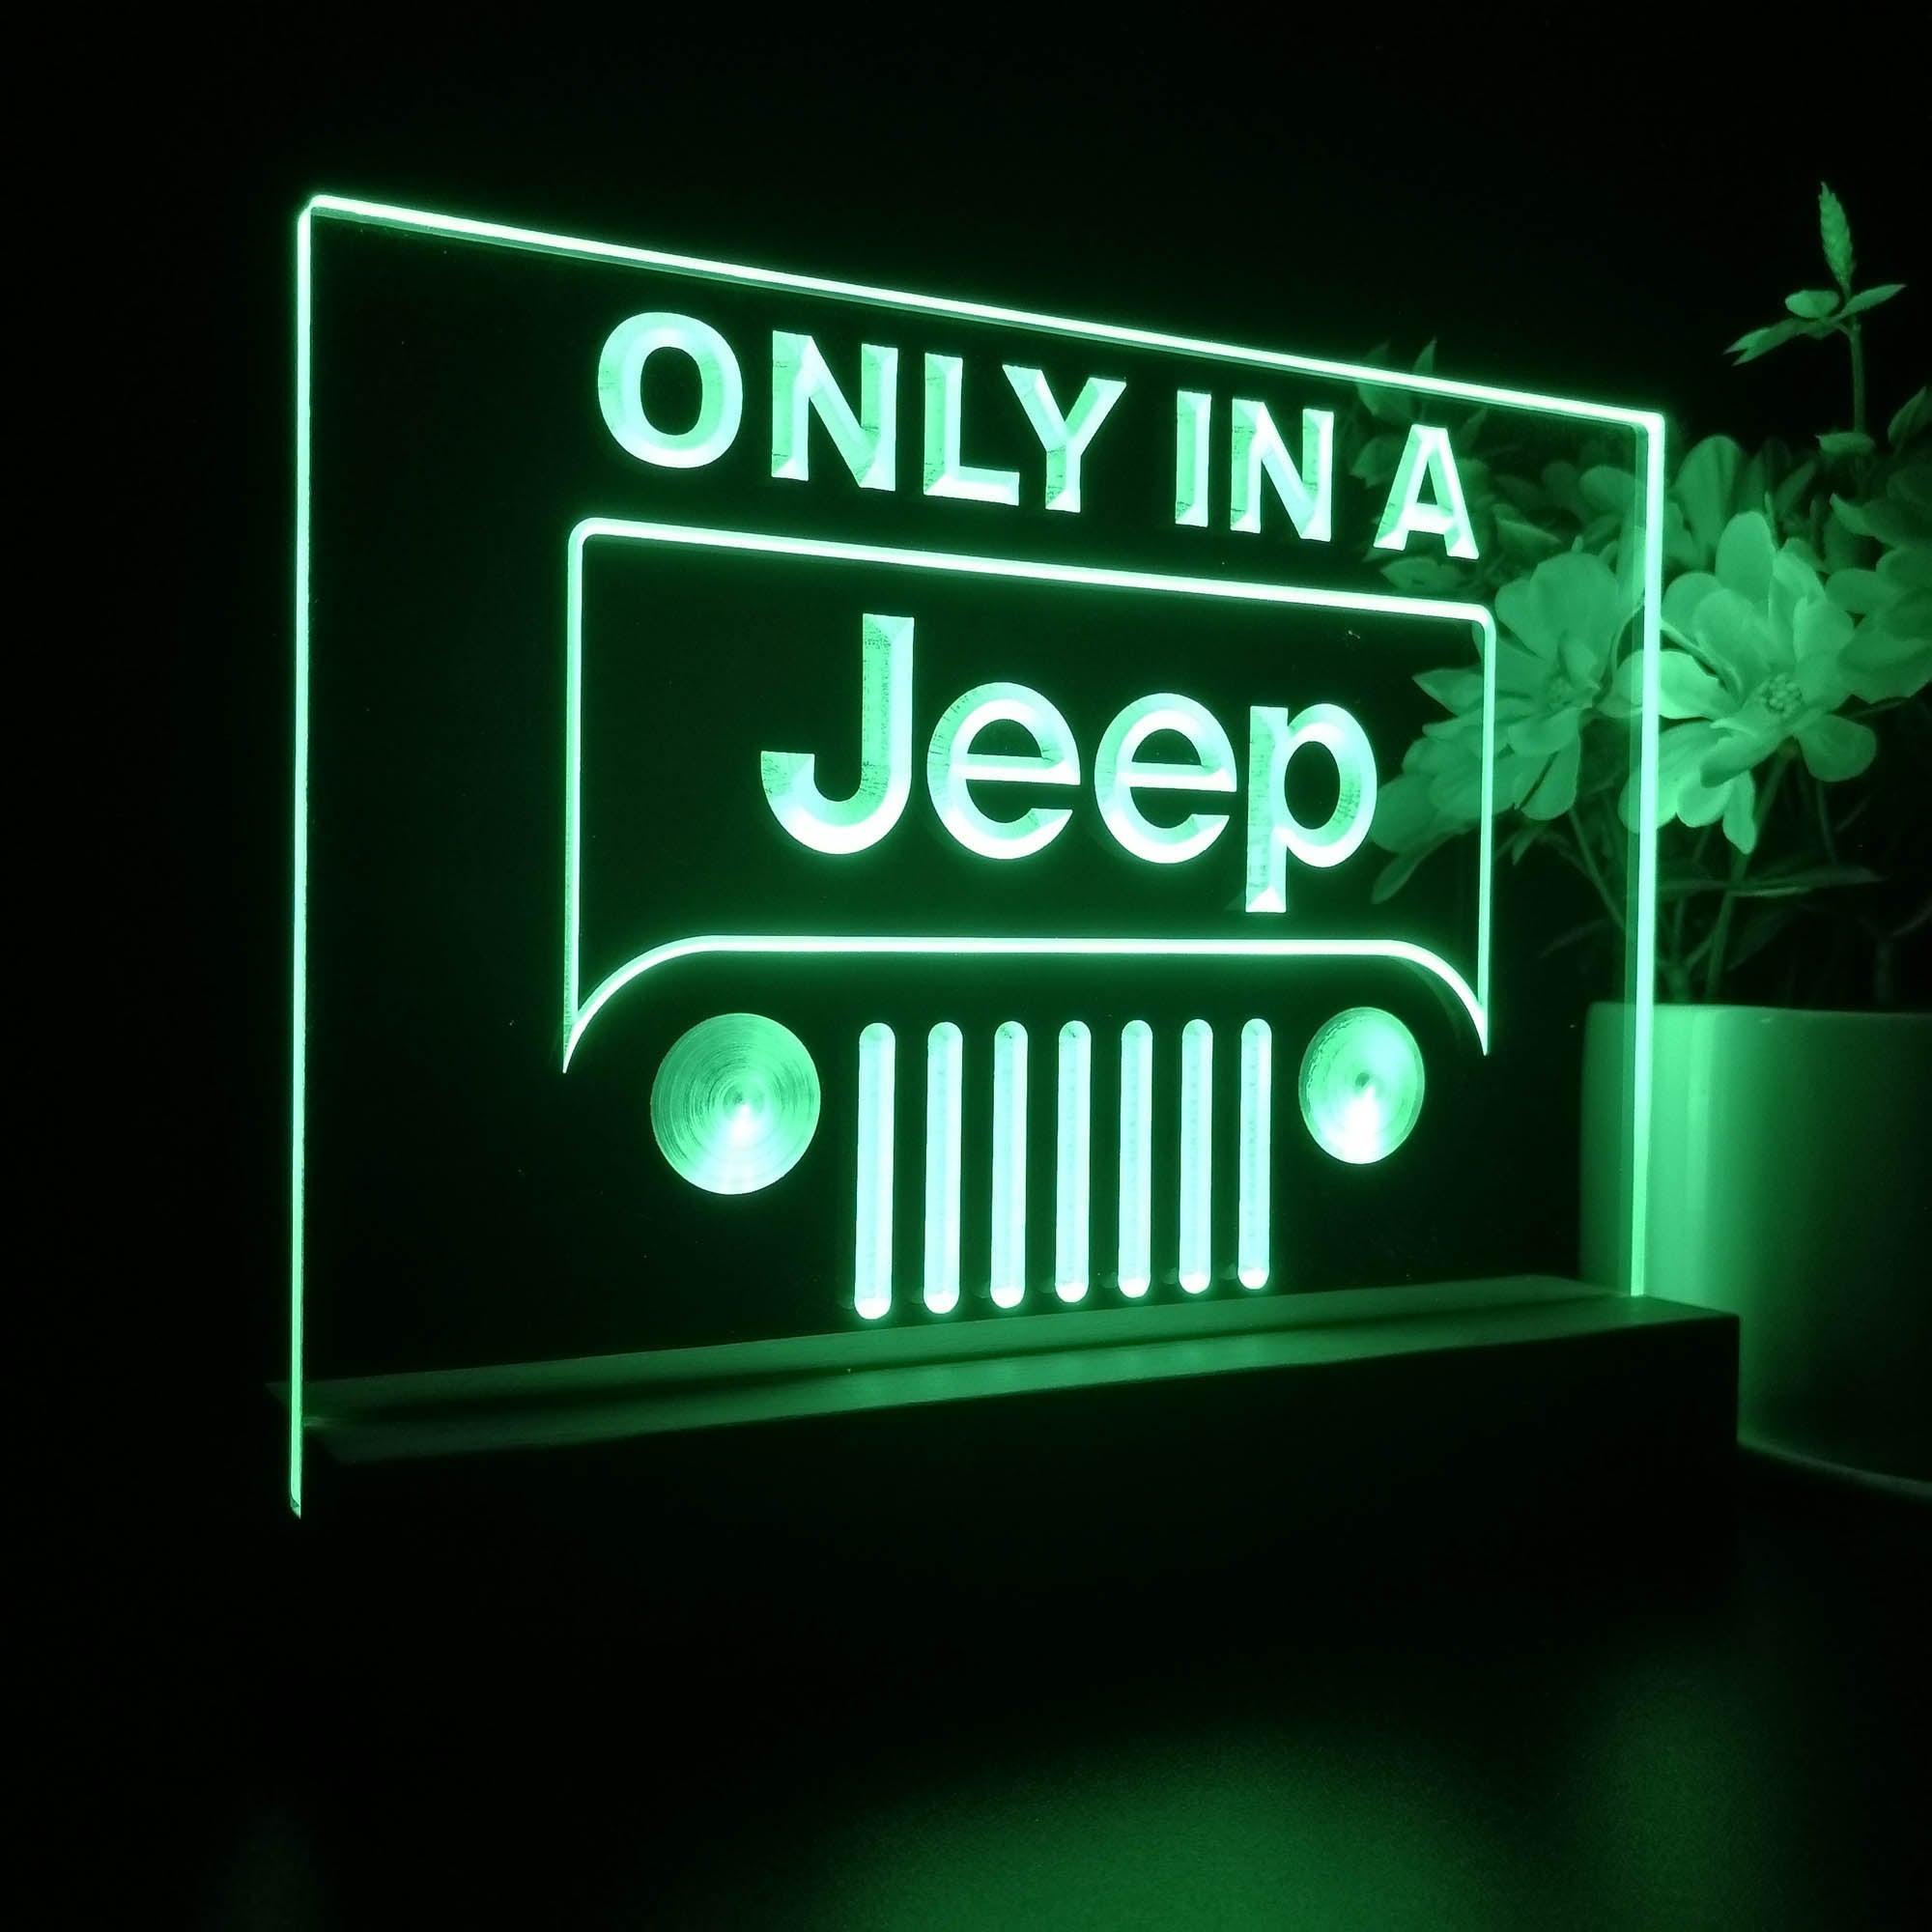 Only in a Jeep 4x4 Sport 3D LED Illusion Night Light